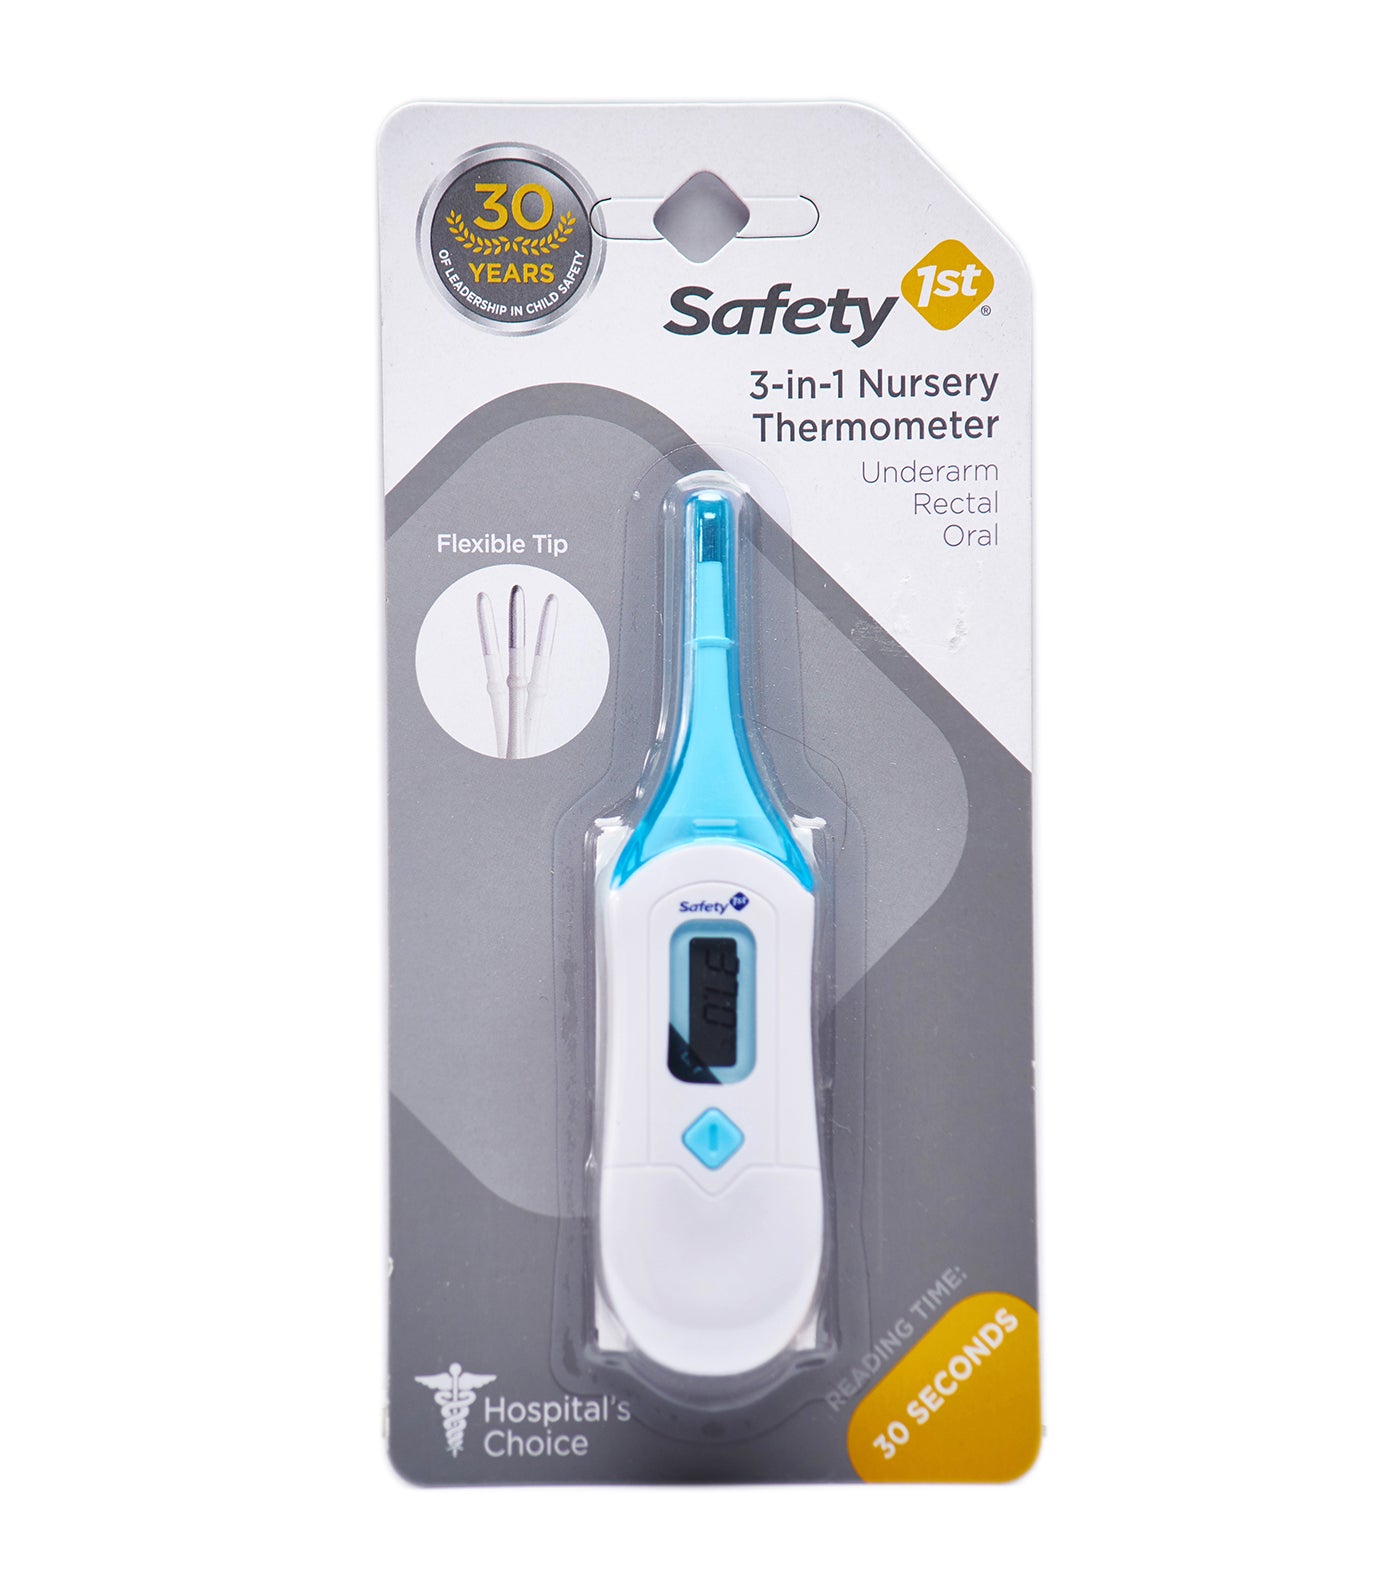 safety 1st 3-in-1 nursery thermometer – arctic